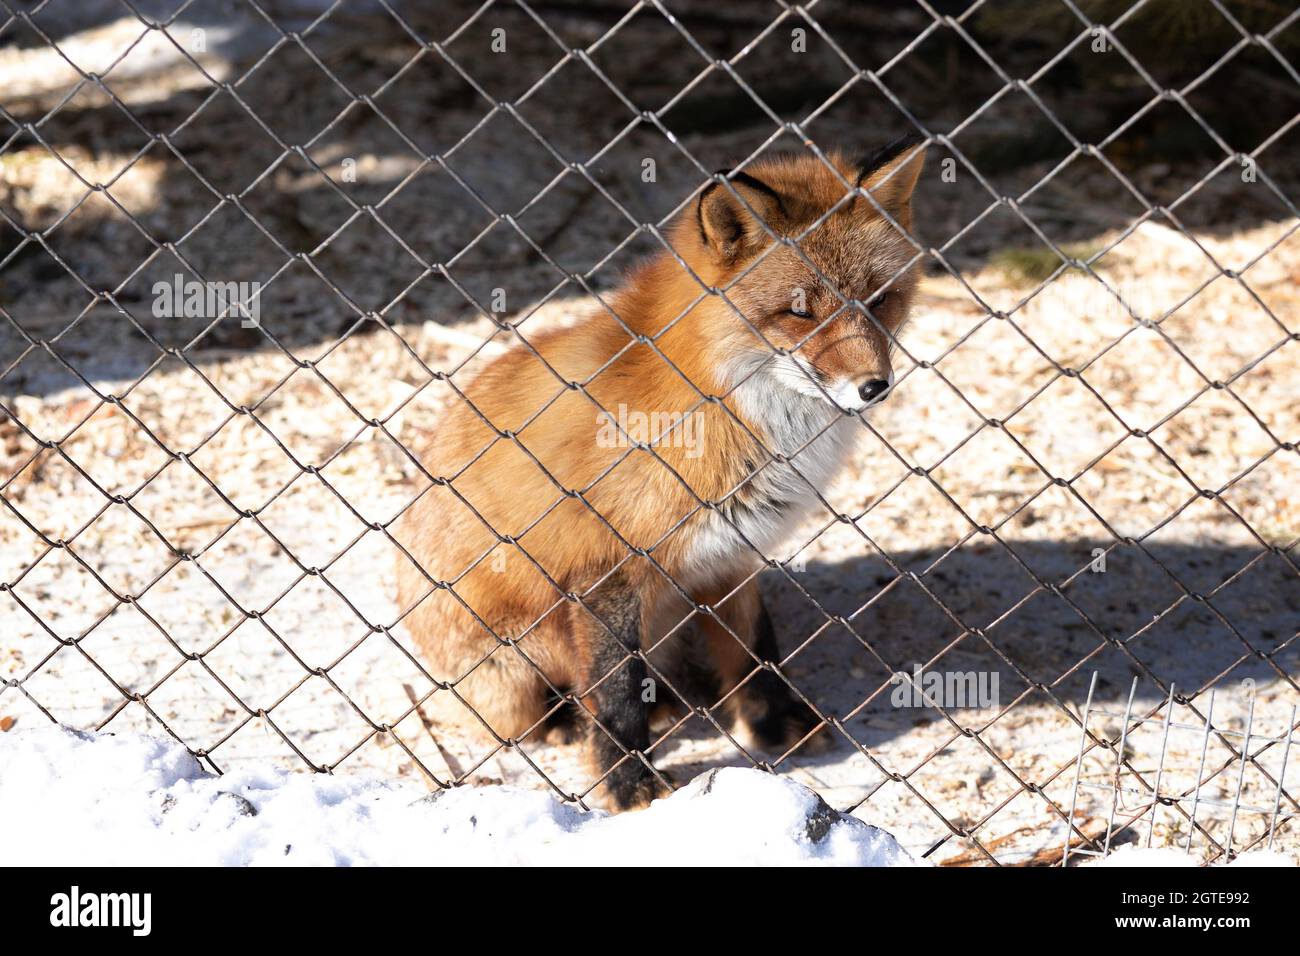 Red Fox In The Zoo Enclosure On A Sunny Winter Day At Freedom Stock Photo -